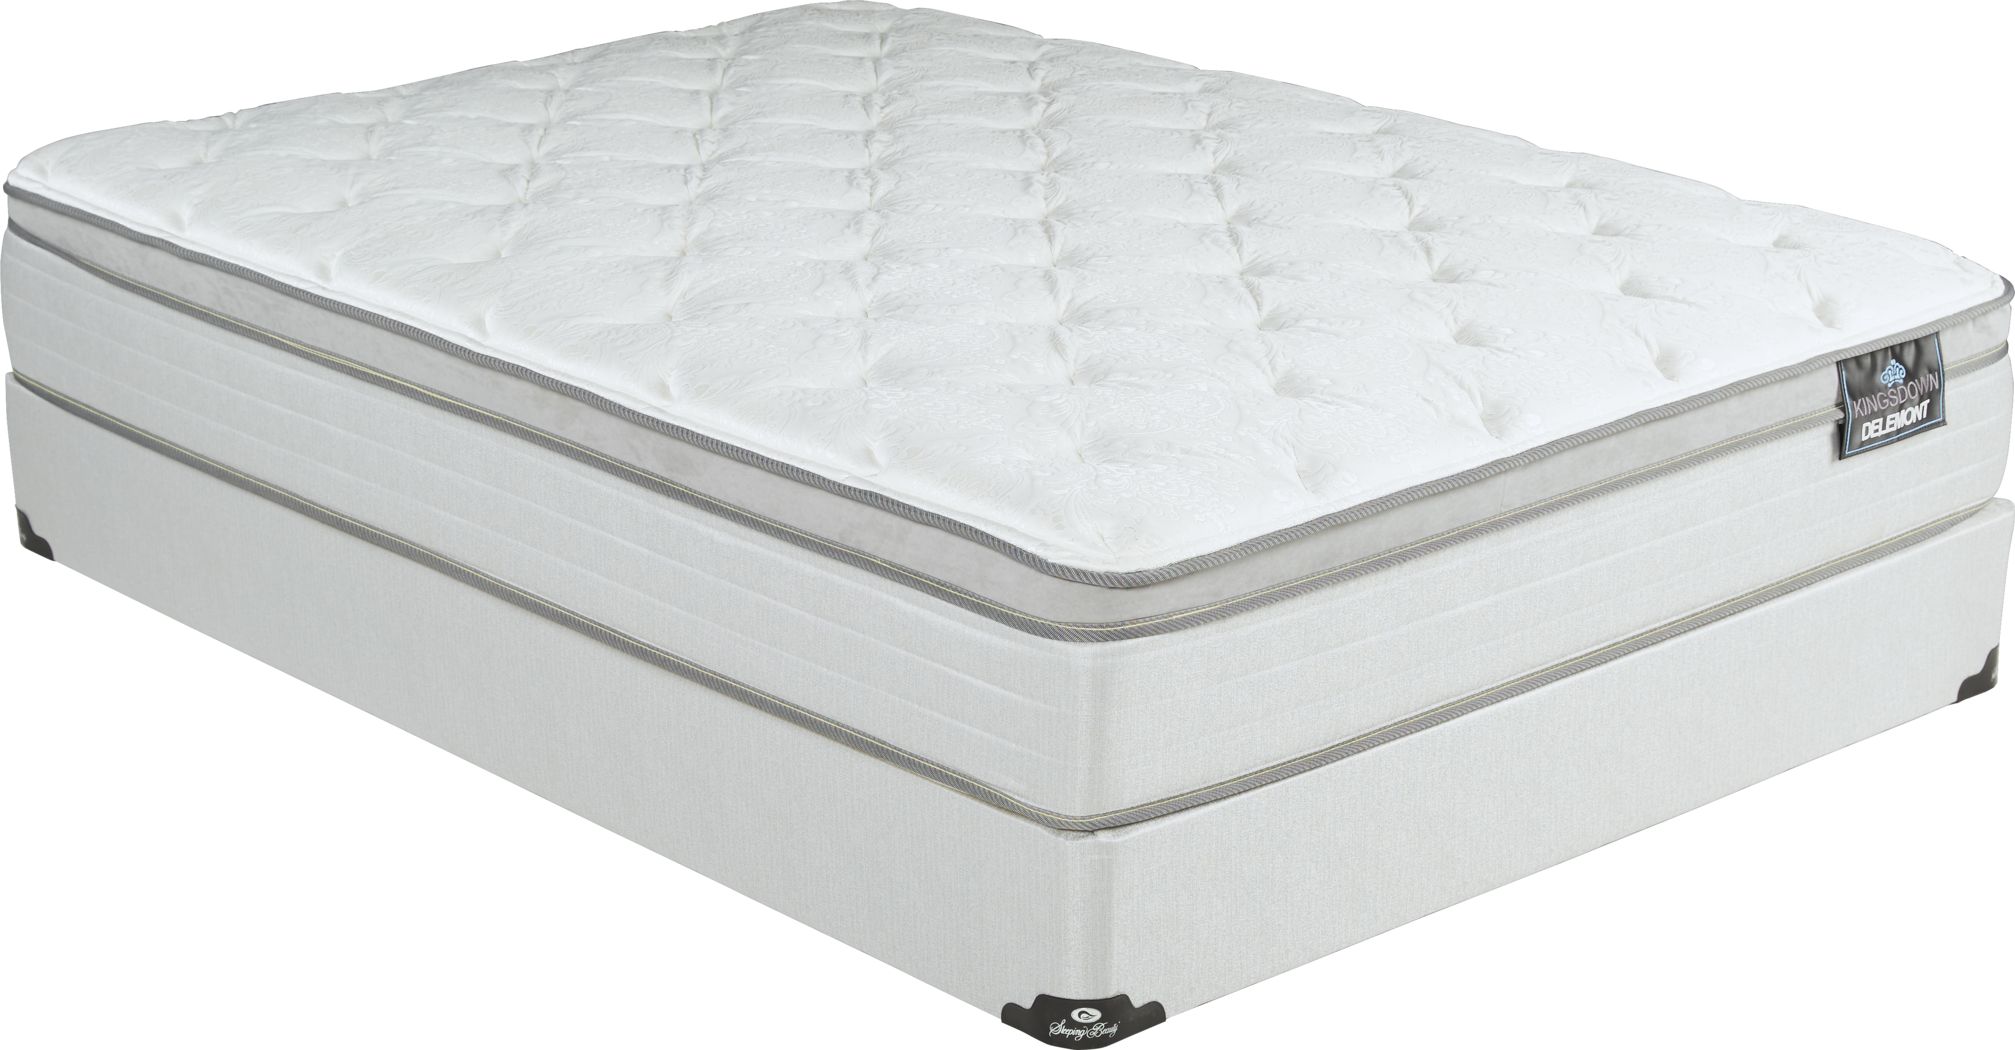 king mattress set with finances with bad credit